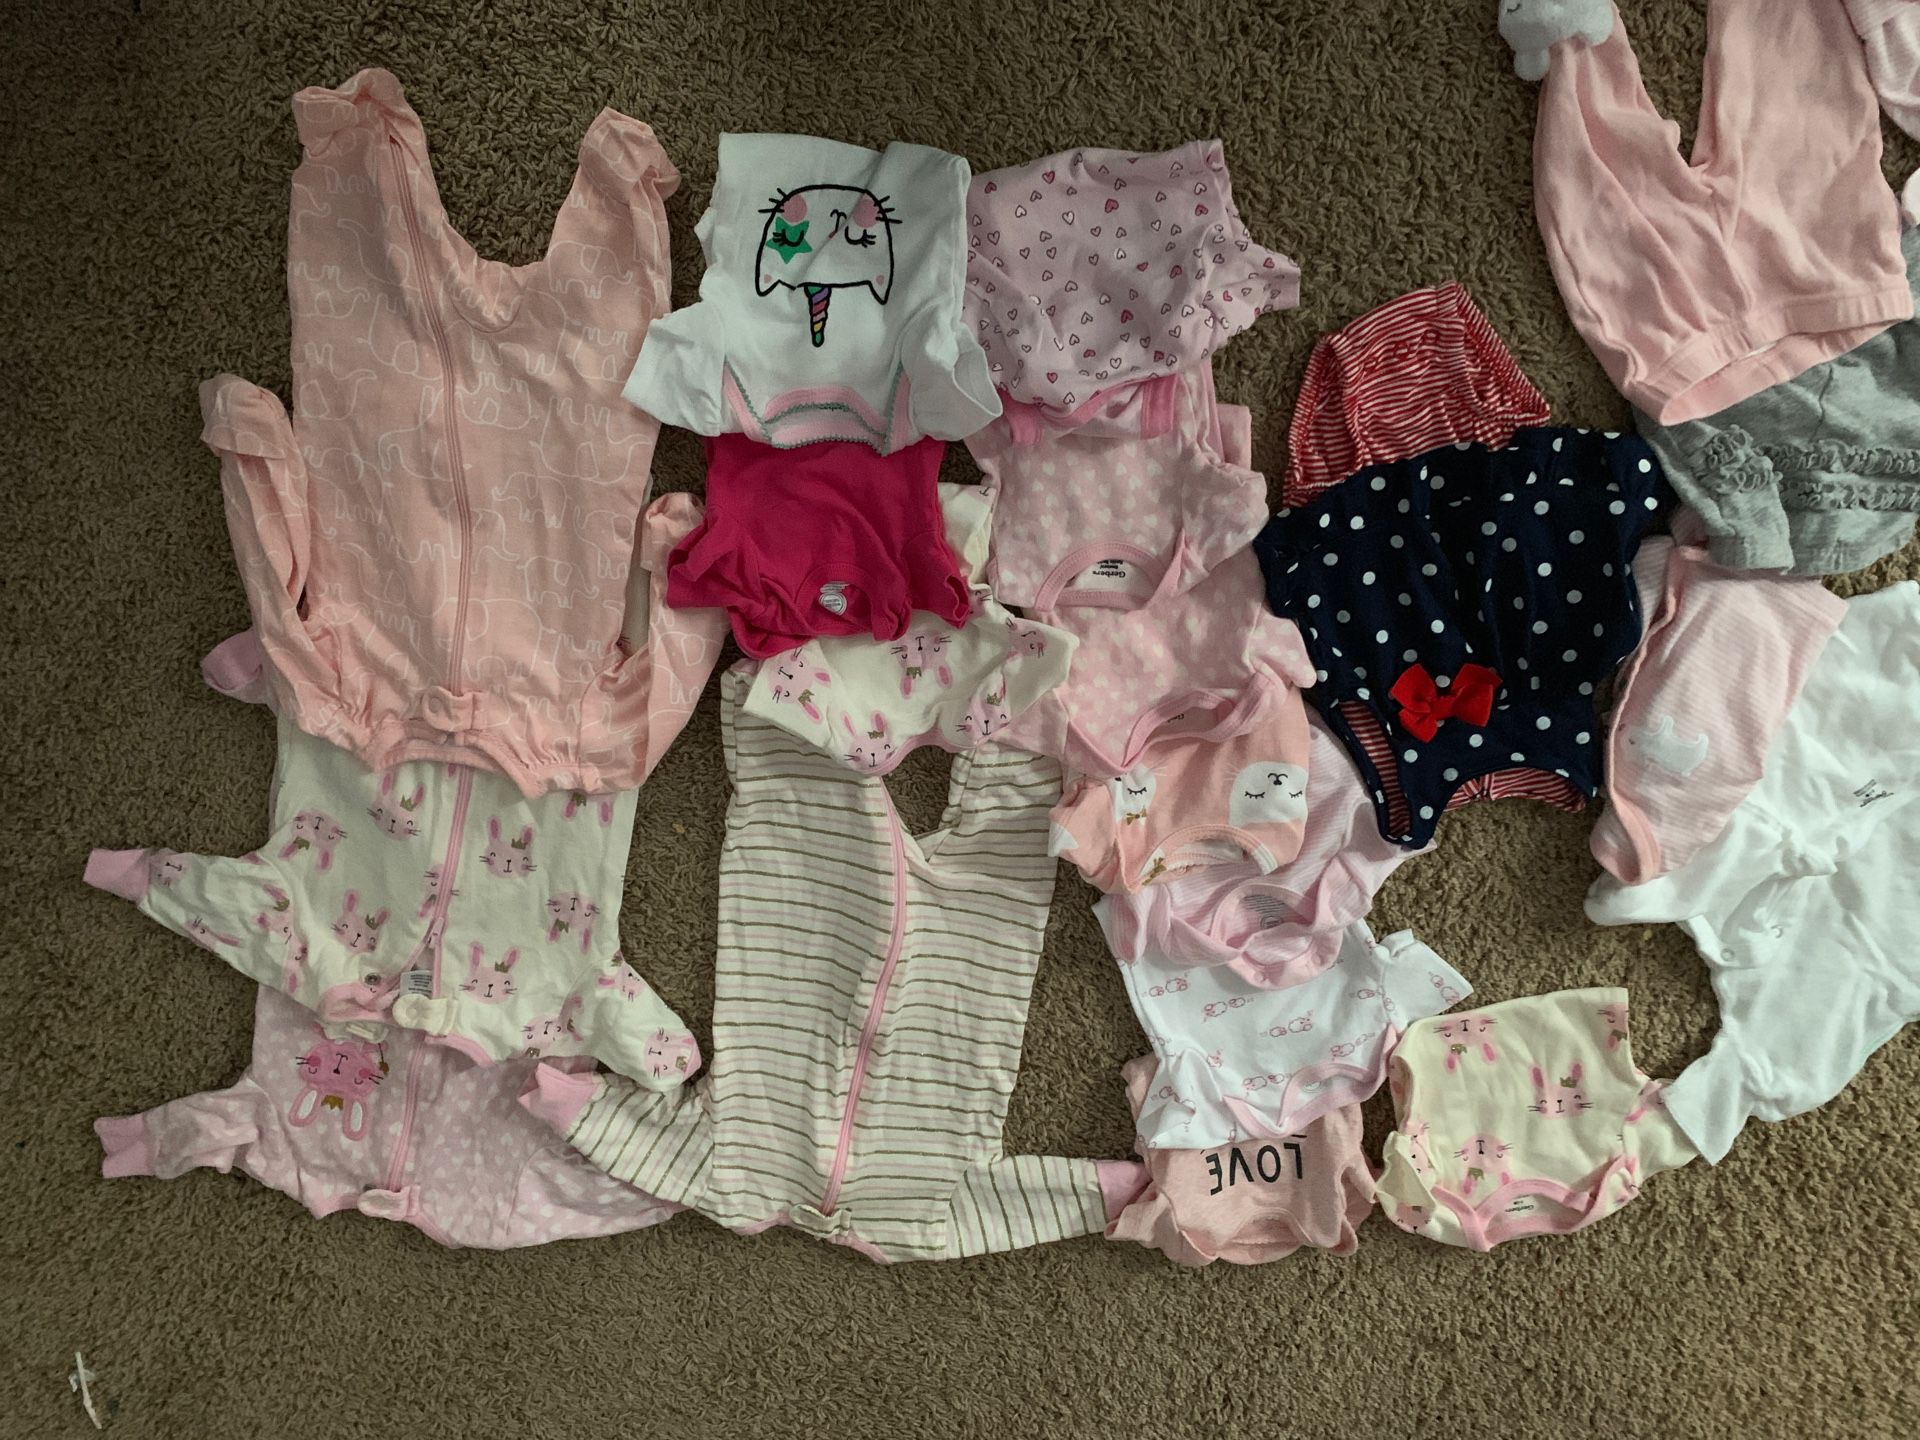 Baby girl clothes NB, newborn !!! Diapers, blanket and hats